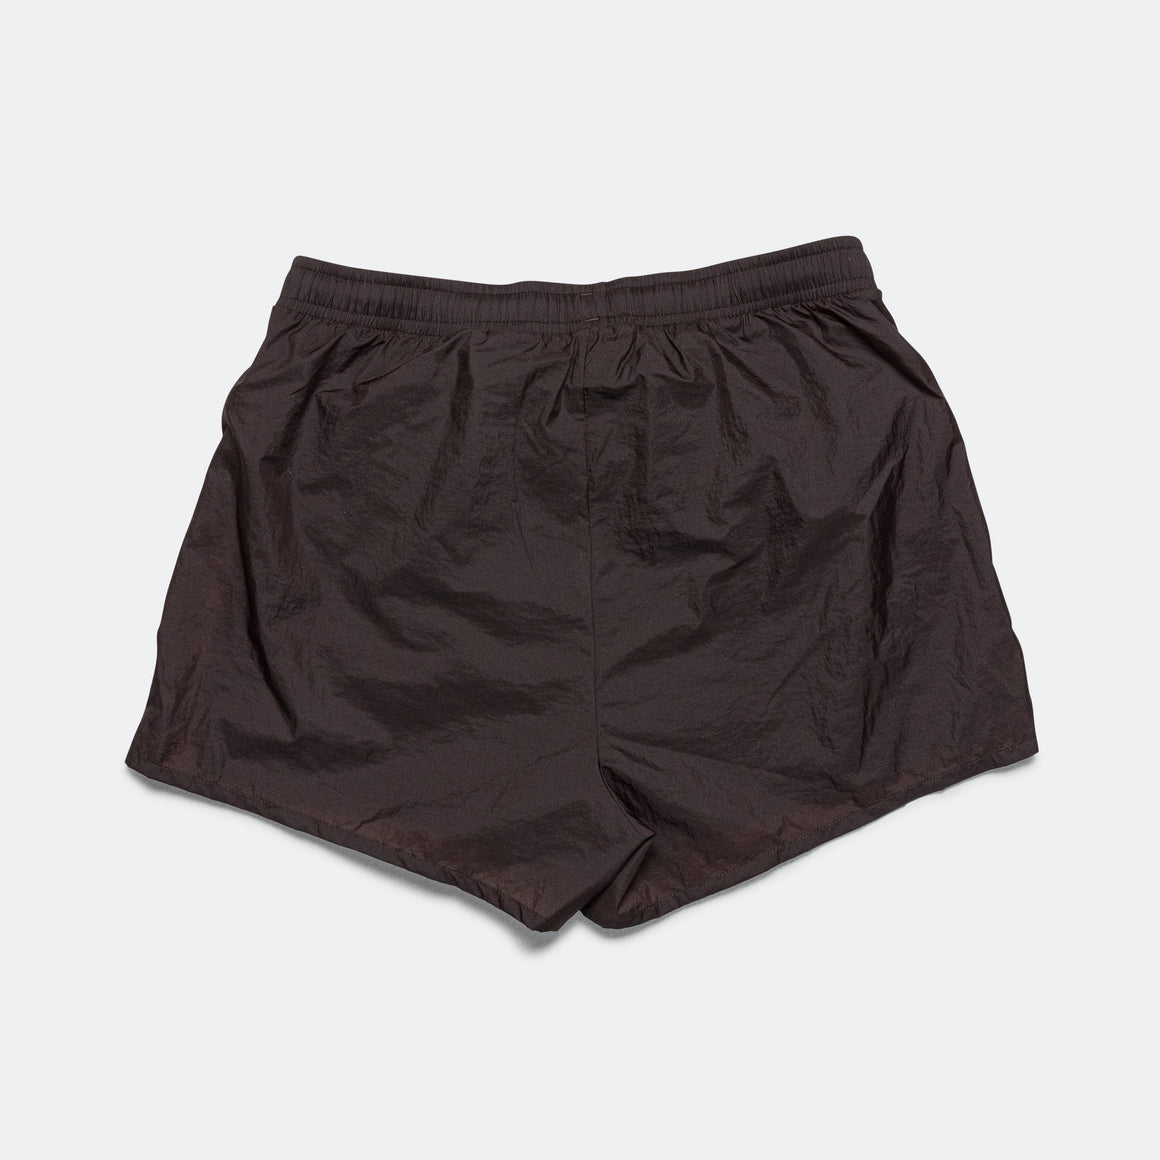 District Vision - Womens Ultralight Zippered Hiking Shorts - Cacao - Up There Athletics